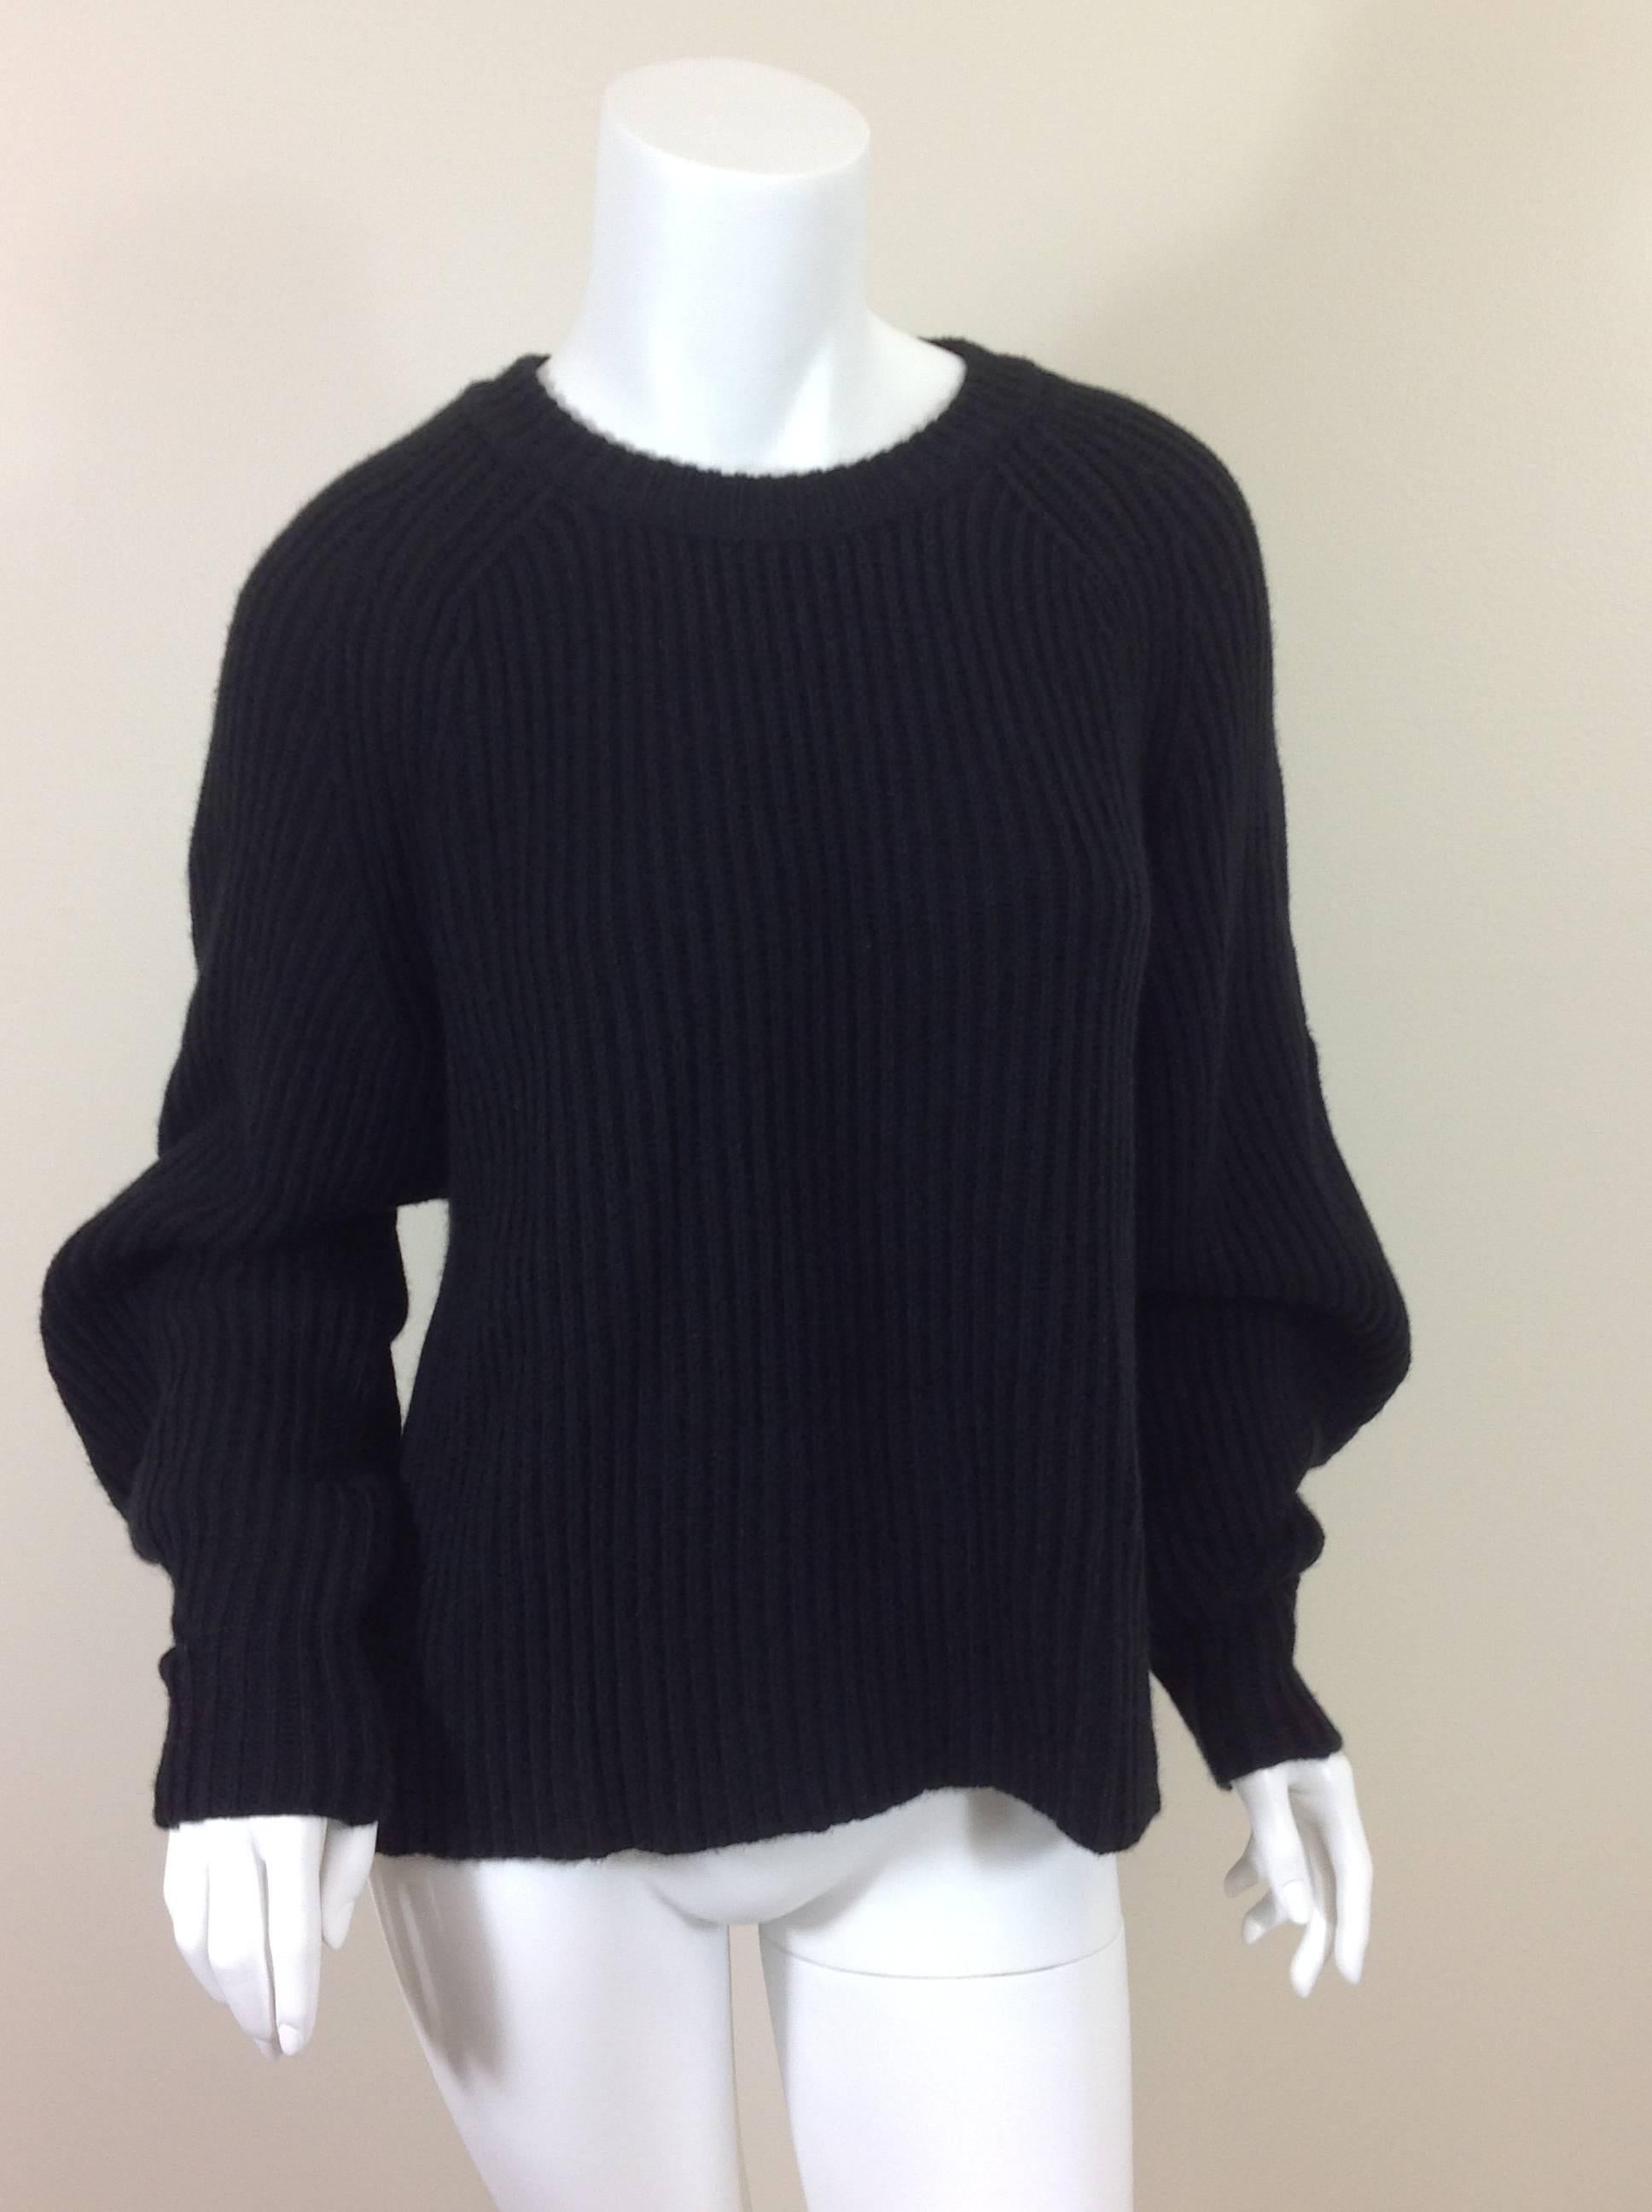 Women's The Row cashmere blend ribbed sweater      Size S